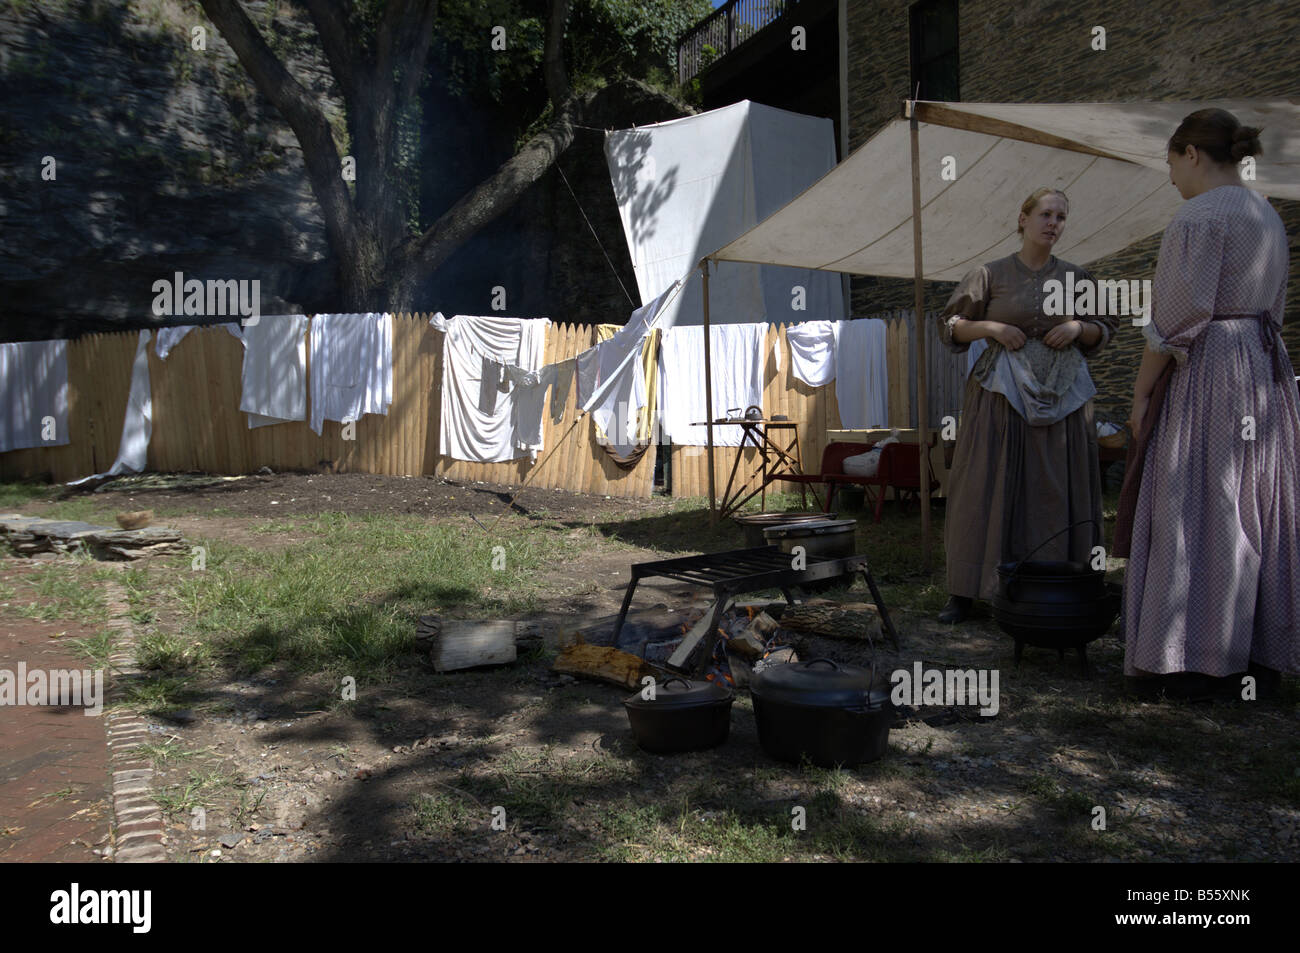 Women doing laundry for the soldiers during a reenactment of the day to day life during the Civil War in Harpers Ferry WV Stock Photo